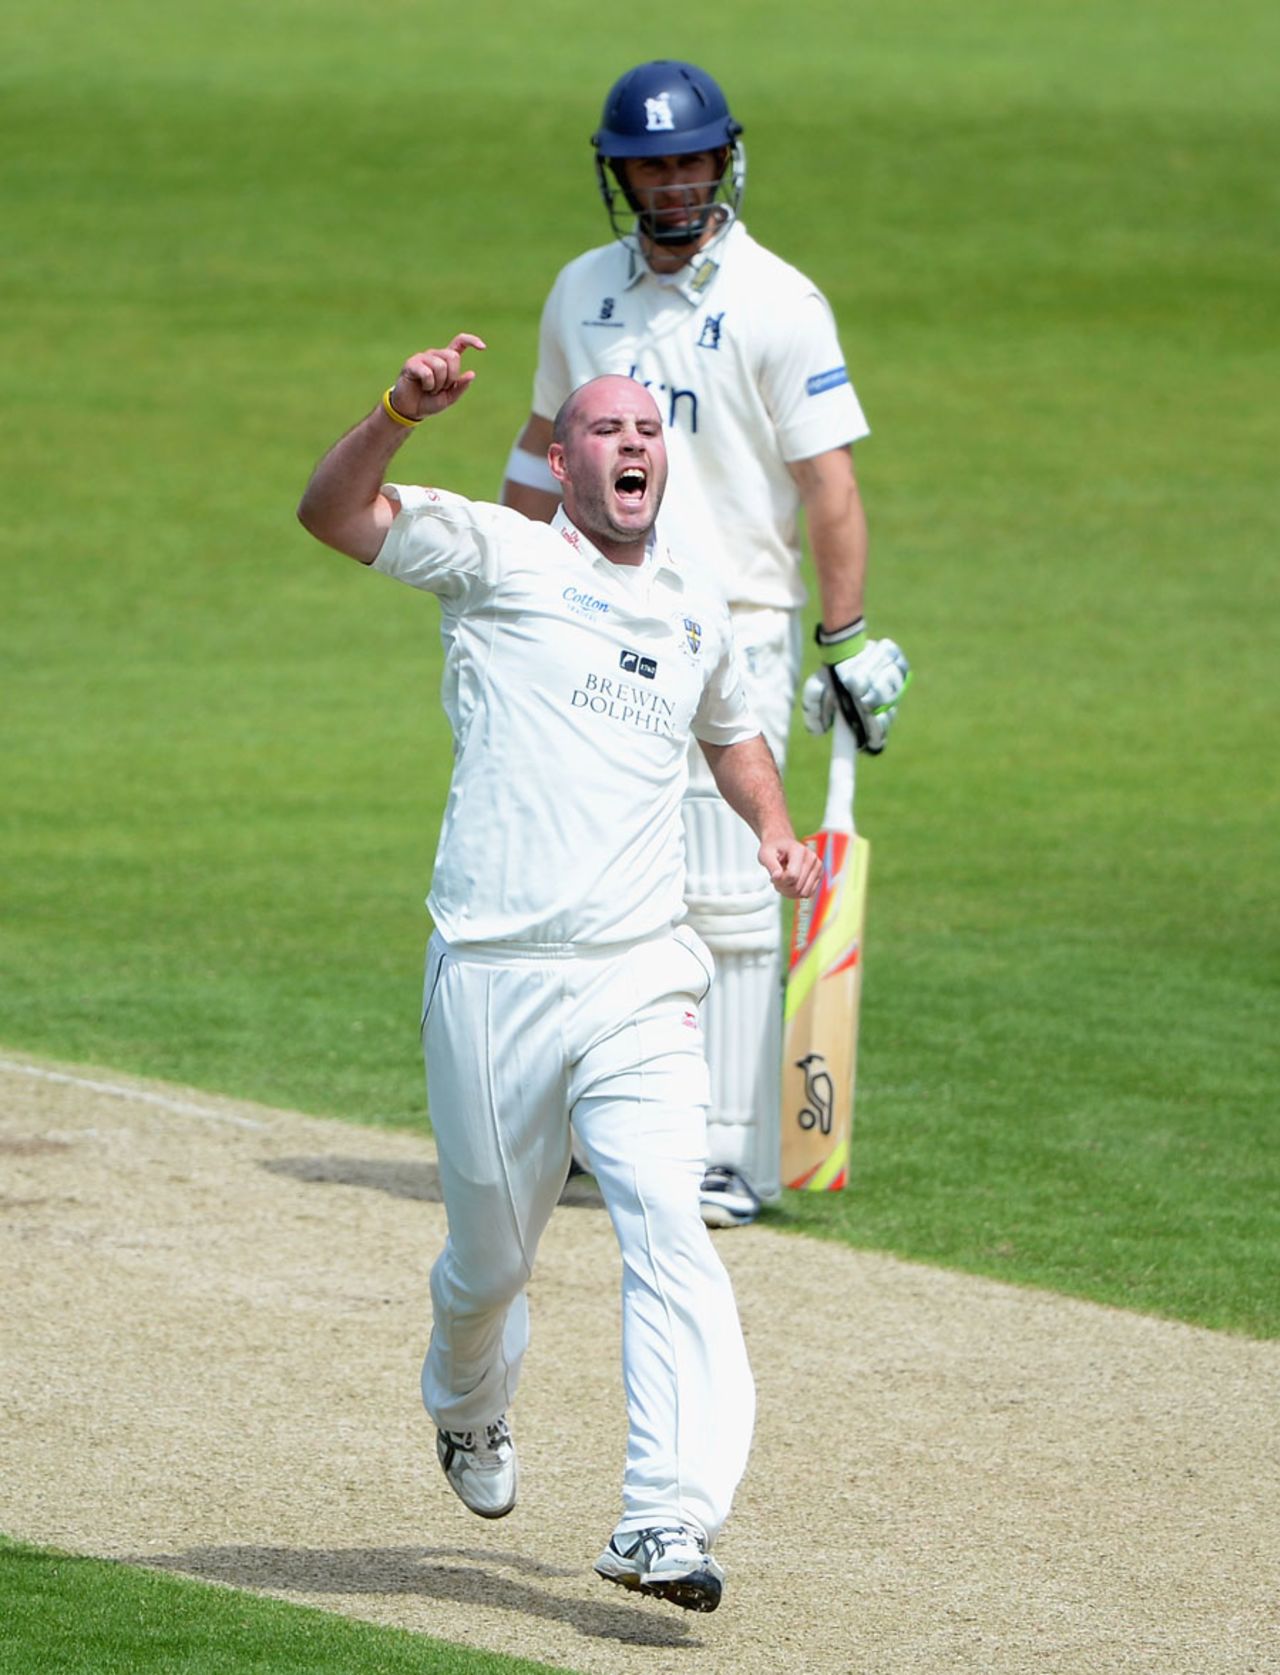 Chris Rushworth struck early blows, Durham v Warwickshire, County Championship, Division One, Chester-le-Street, 2nd day, June 13, 2013